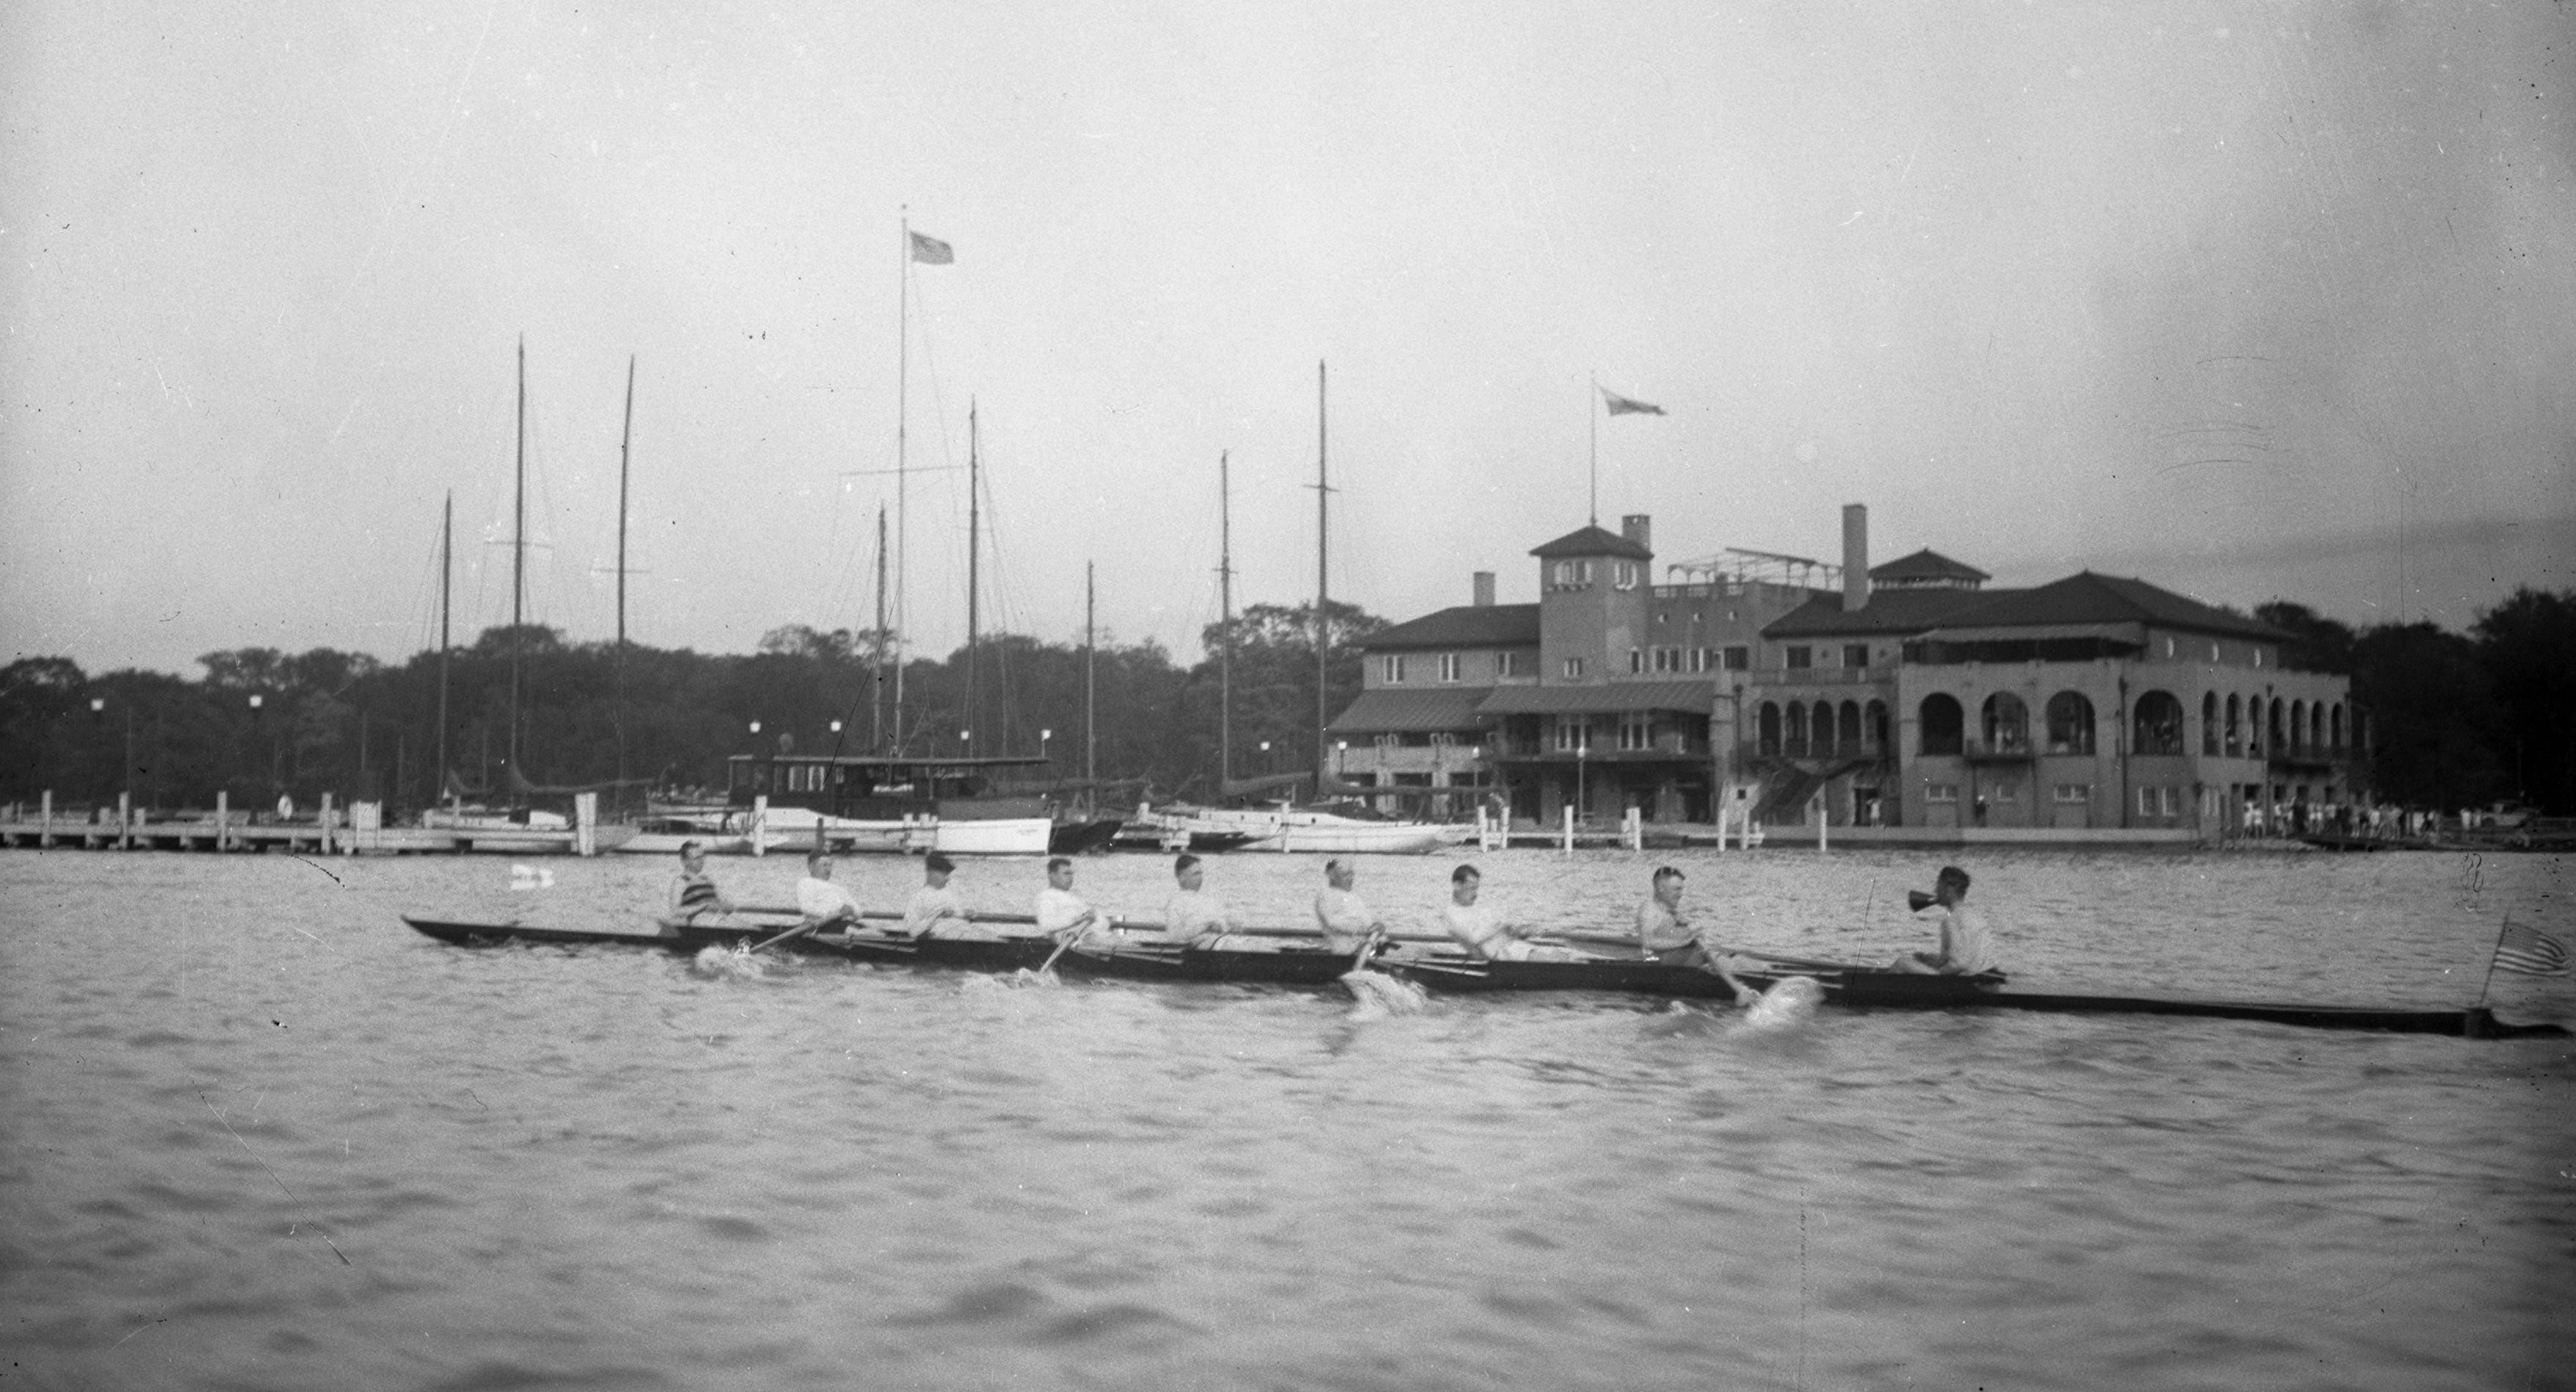 The Belle Isle Boathouse was built in 1902 after five previous boathouses, all made of wood burned down. It was founded in 1839 and moved to Belle Isle in the 1900s.